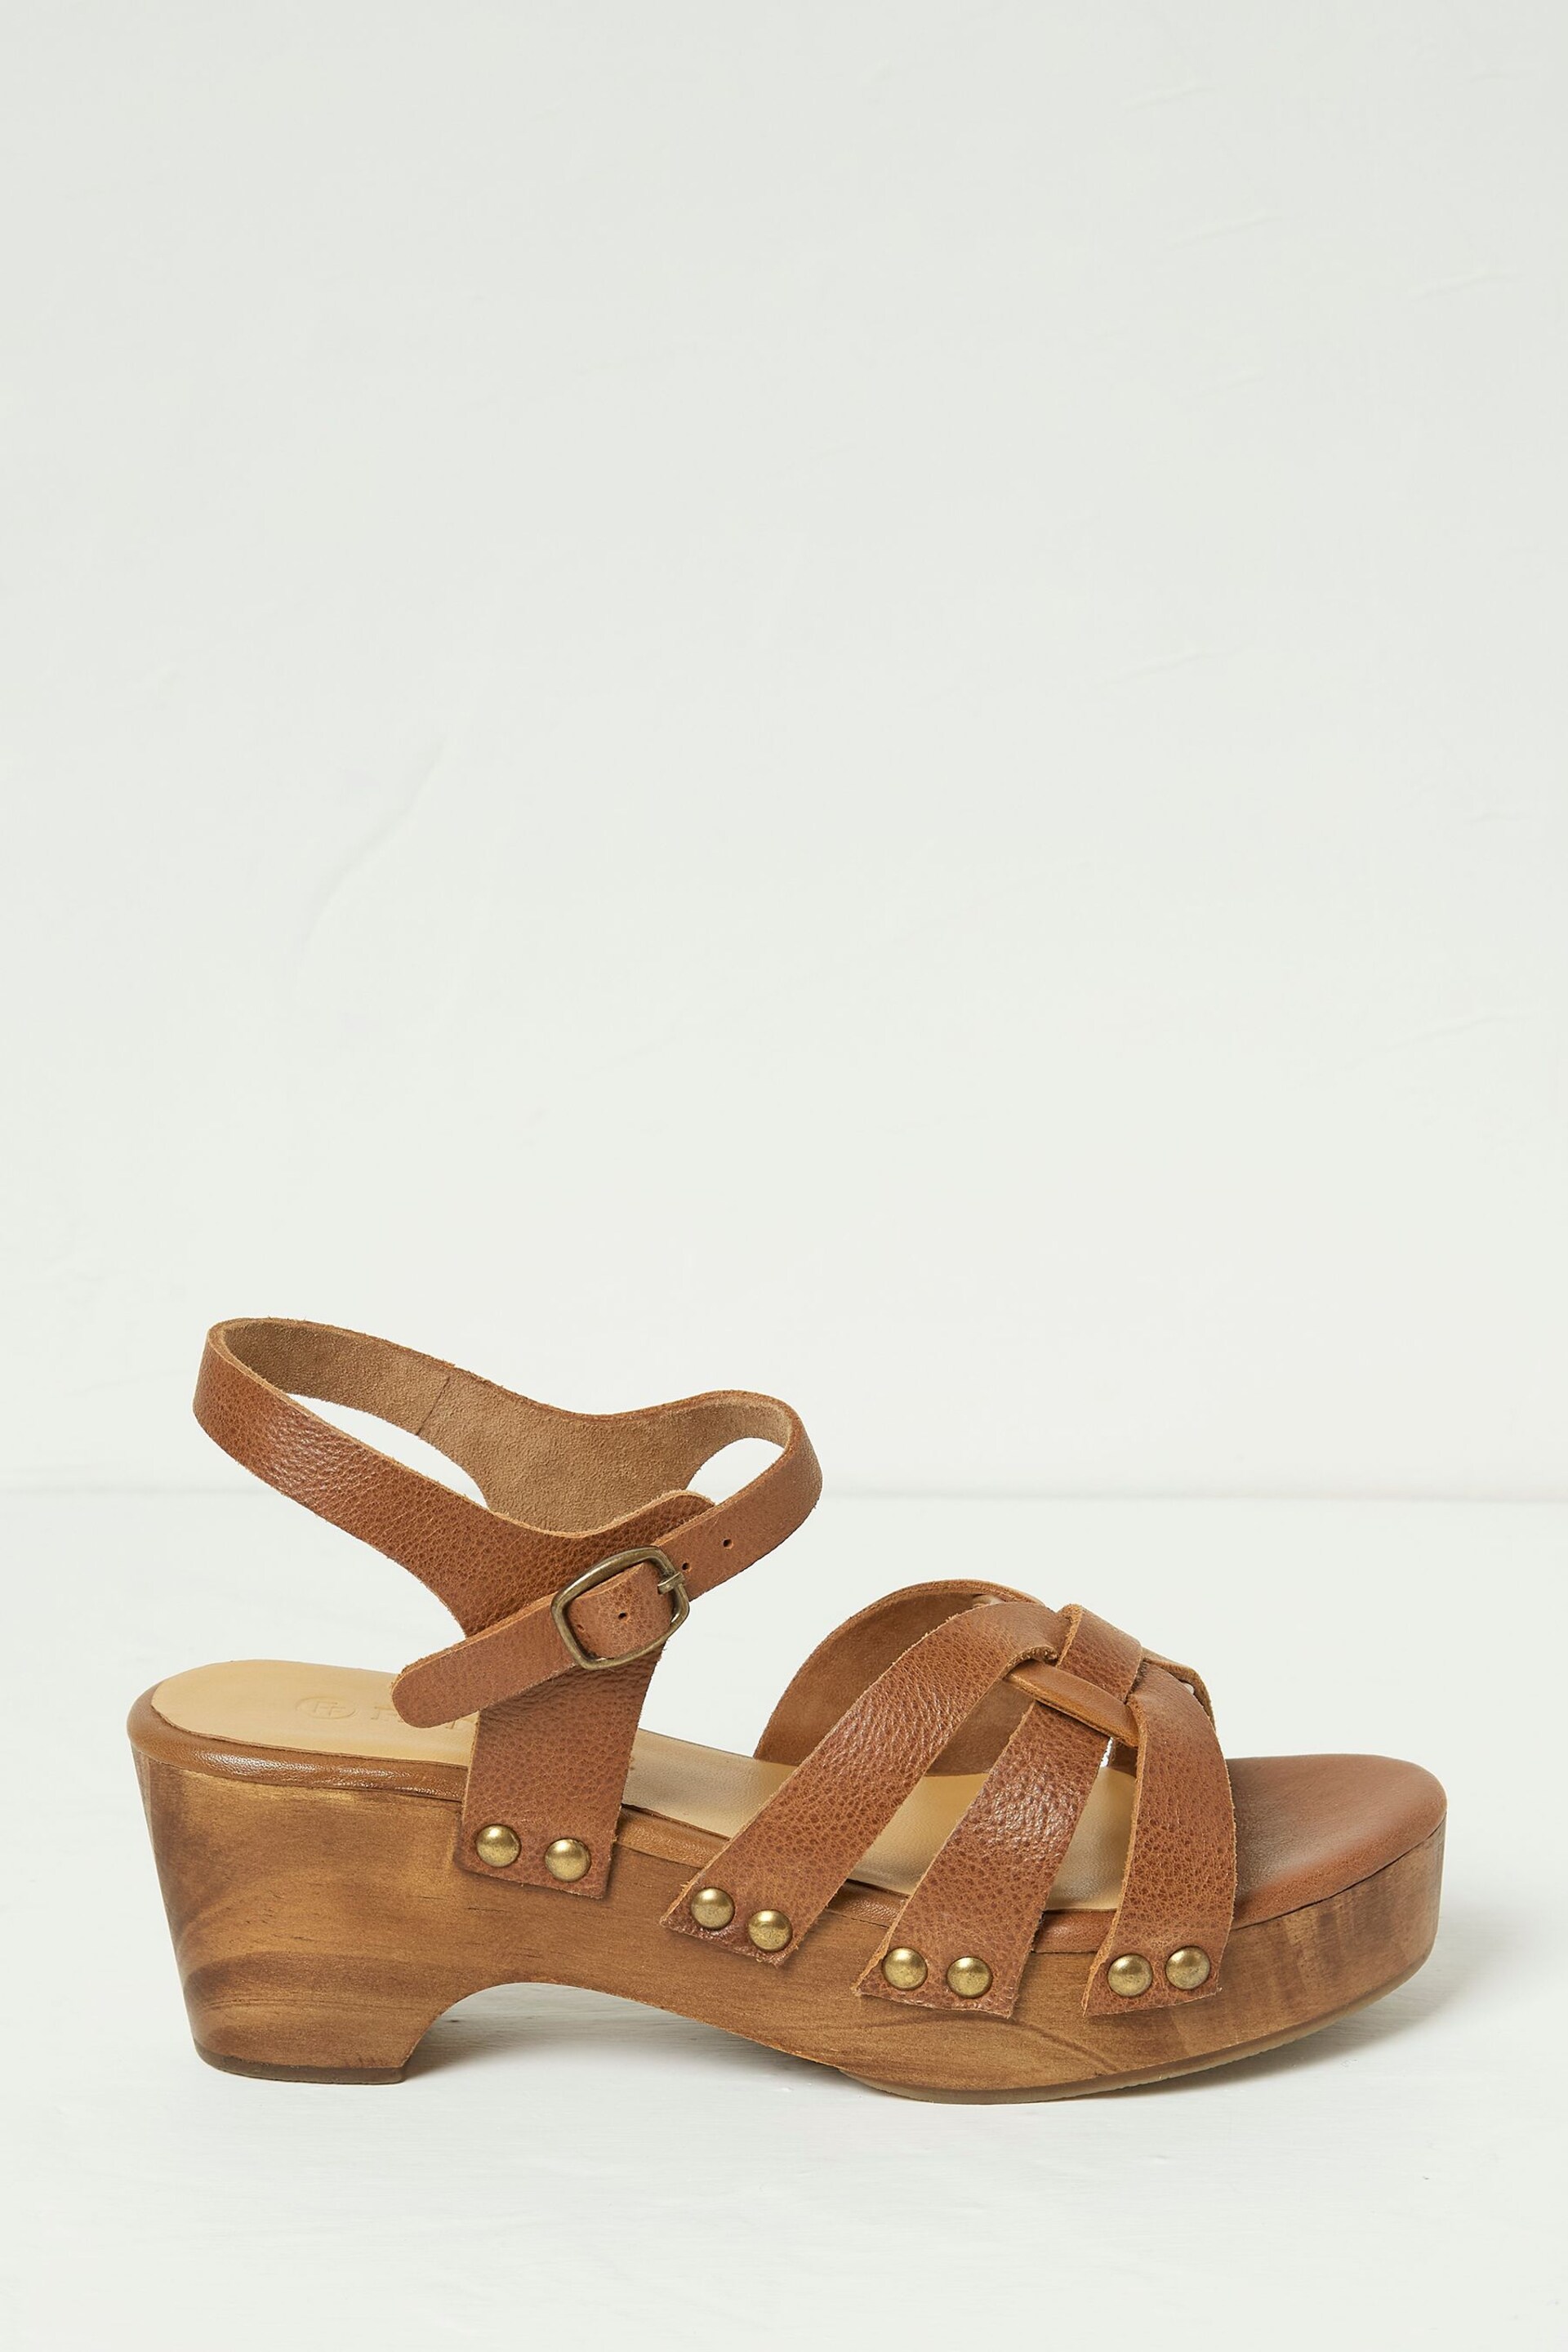 FatFace Brown Mid Heel Clogs - Image 1 of 3